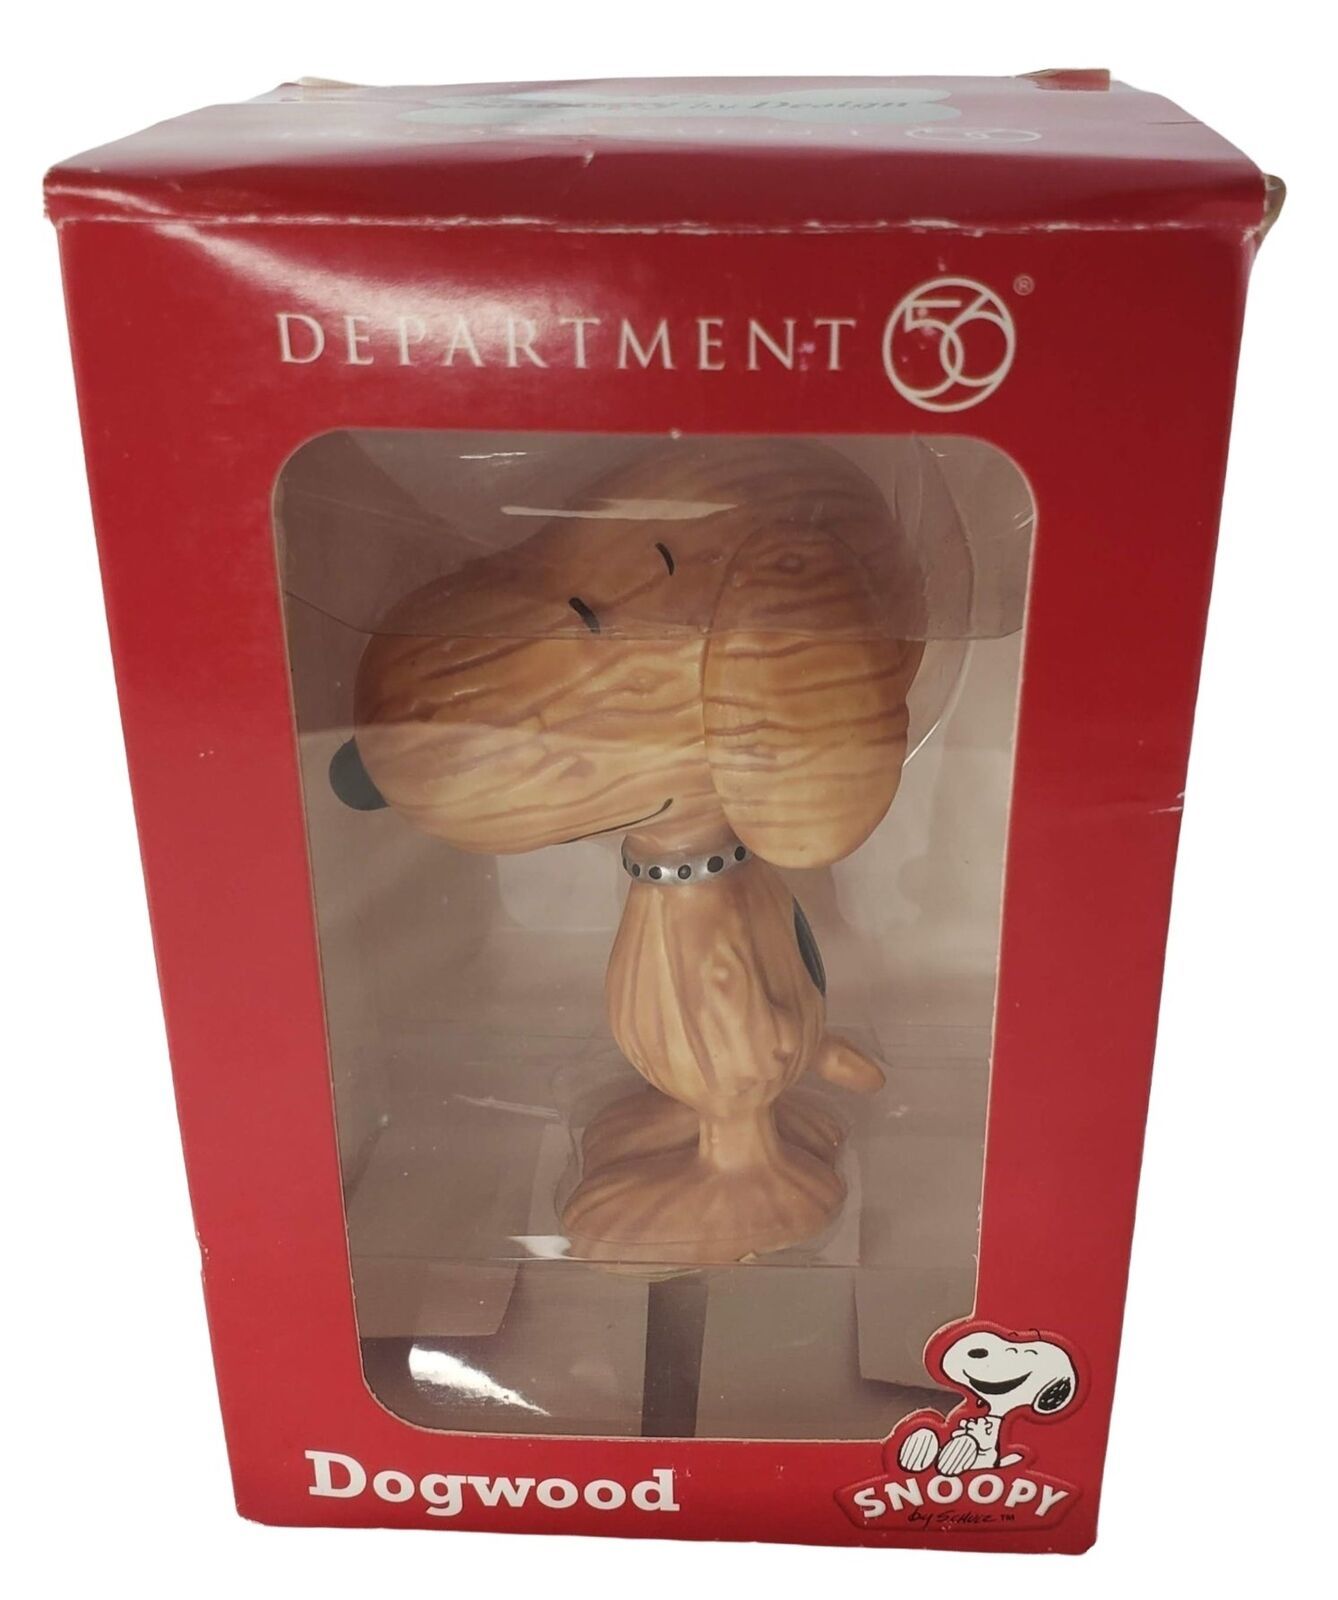 Department 56 Peanuts Snoopy By Design Dogwood Porcelain Figurine 2013 Series - $99.00